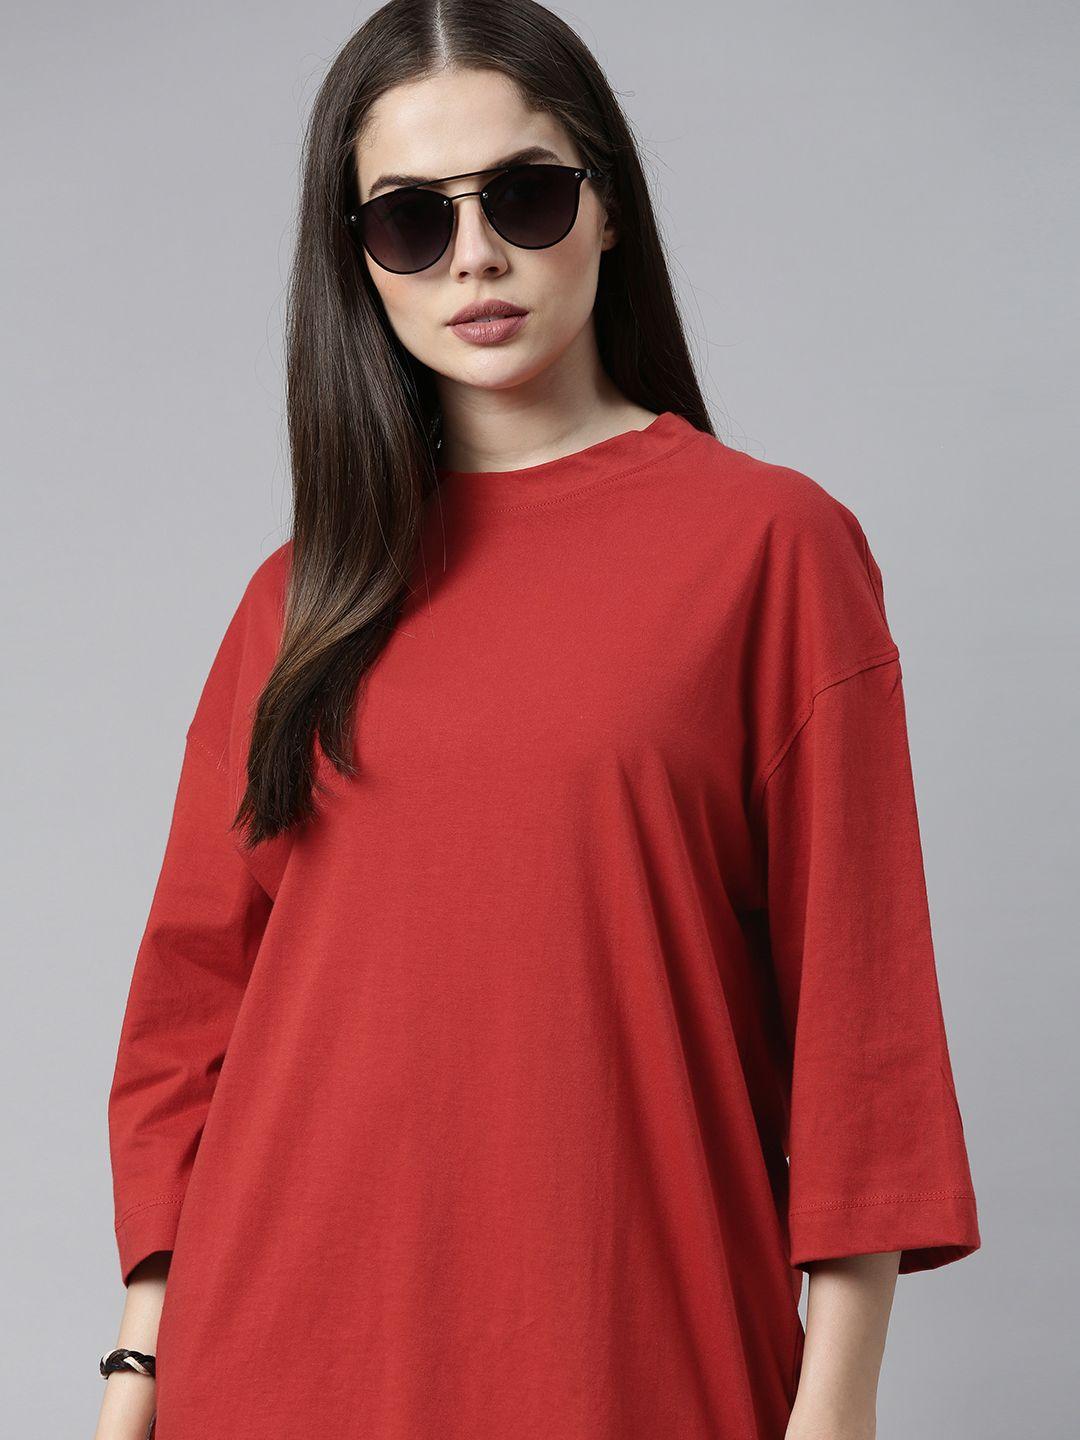 the roadster lifestyle co women rust red pure cotton solid drop-shoulder sleeves pure cotton t-shirt